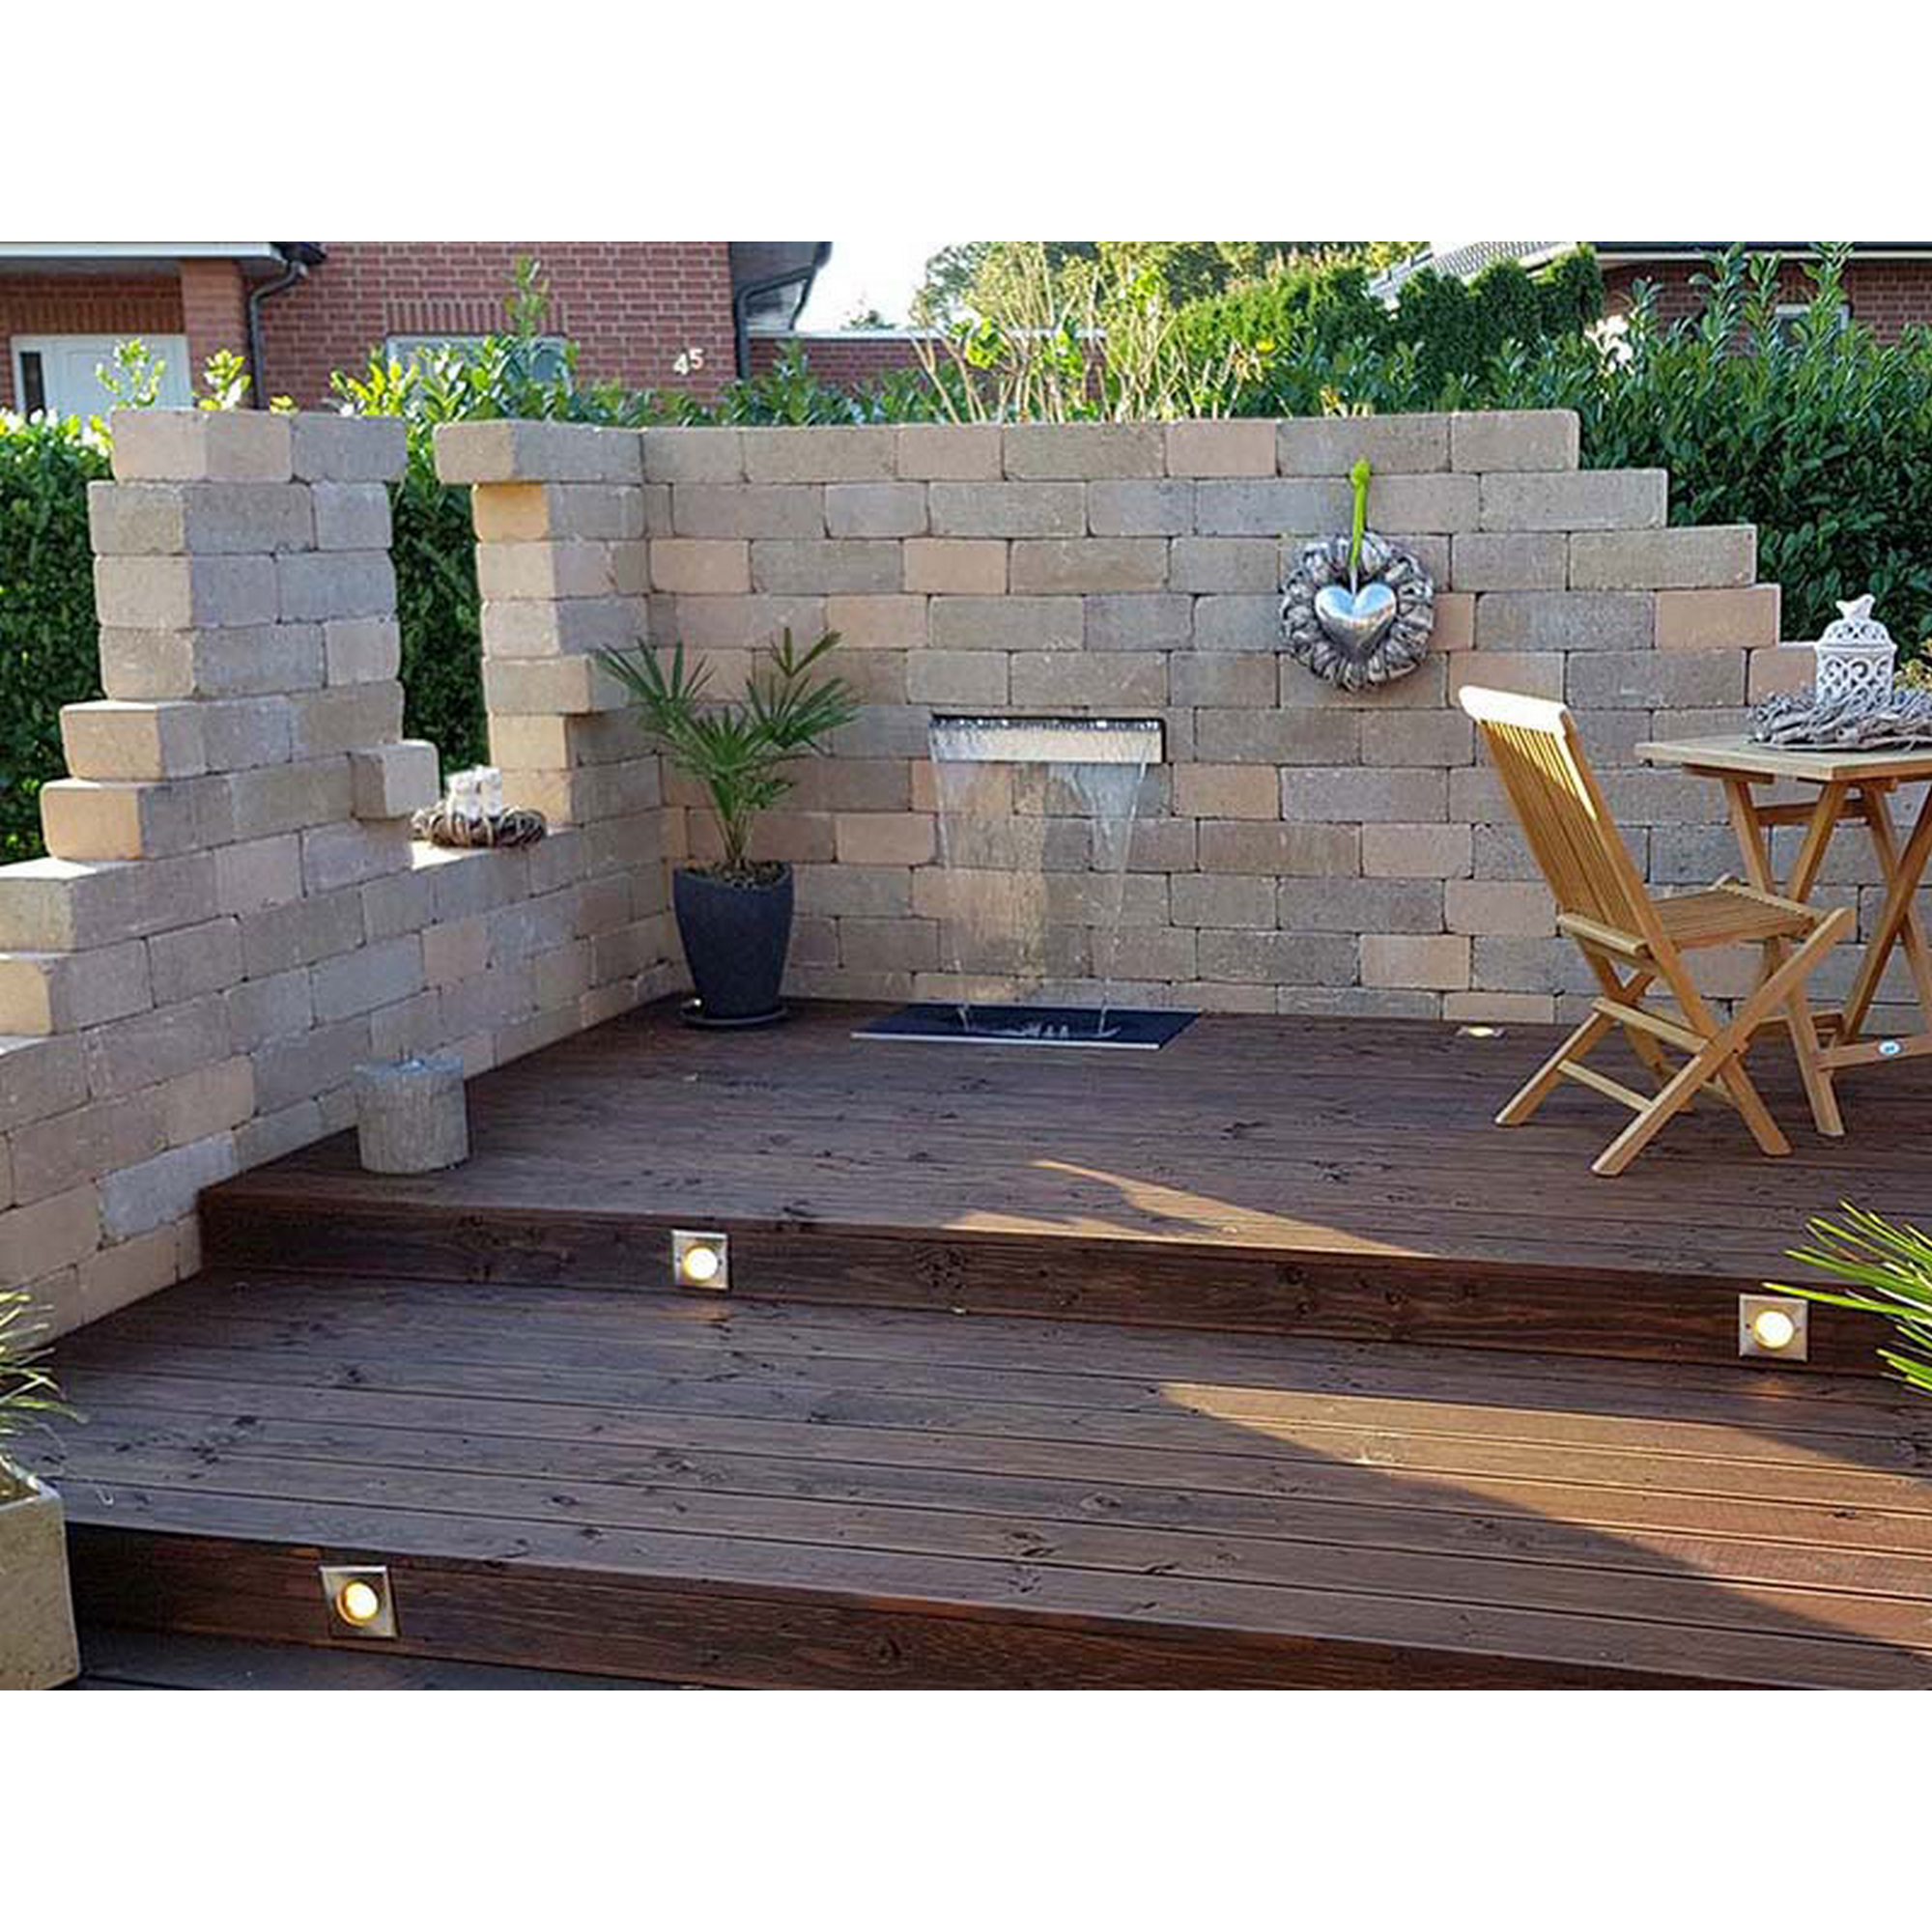 Mauerstein 'T-Wall Aged Maxi' Beton sandsteinfarben 28 x 21 x 14 cm + product picture